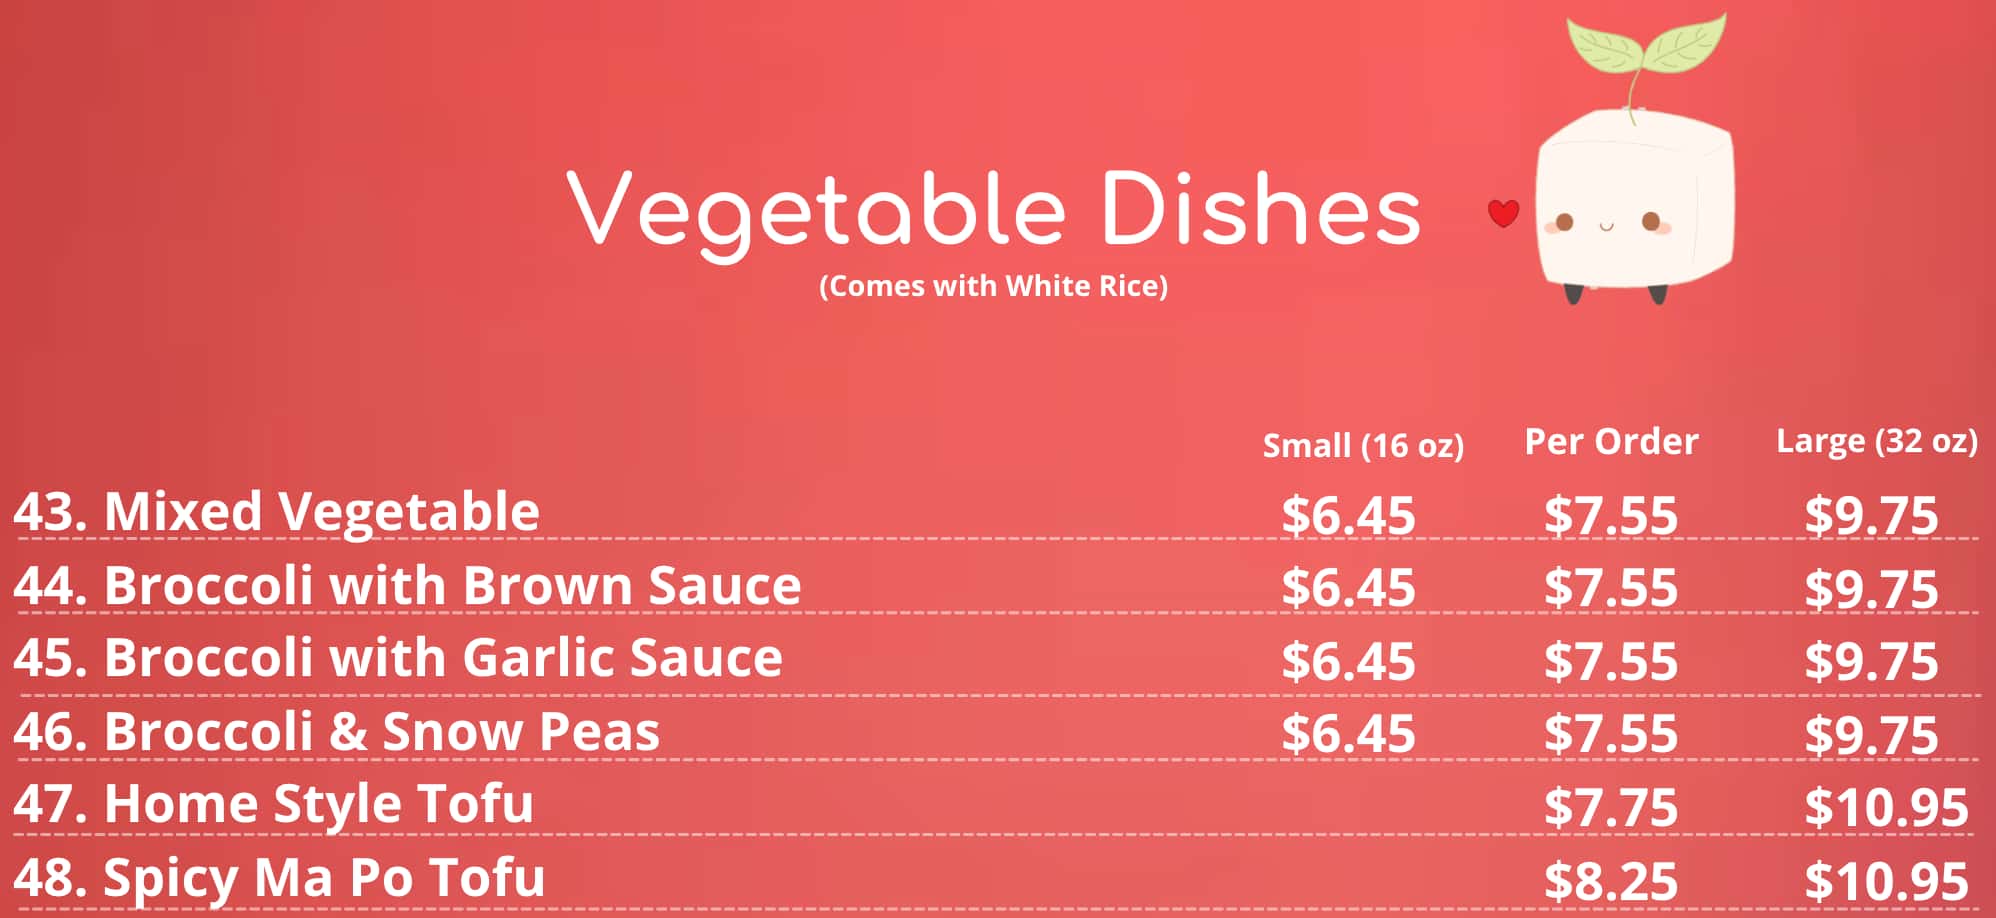 Yums Chinese Food Vegetable Dishes Menu